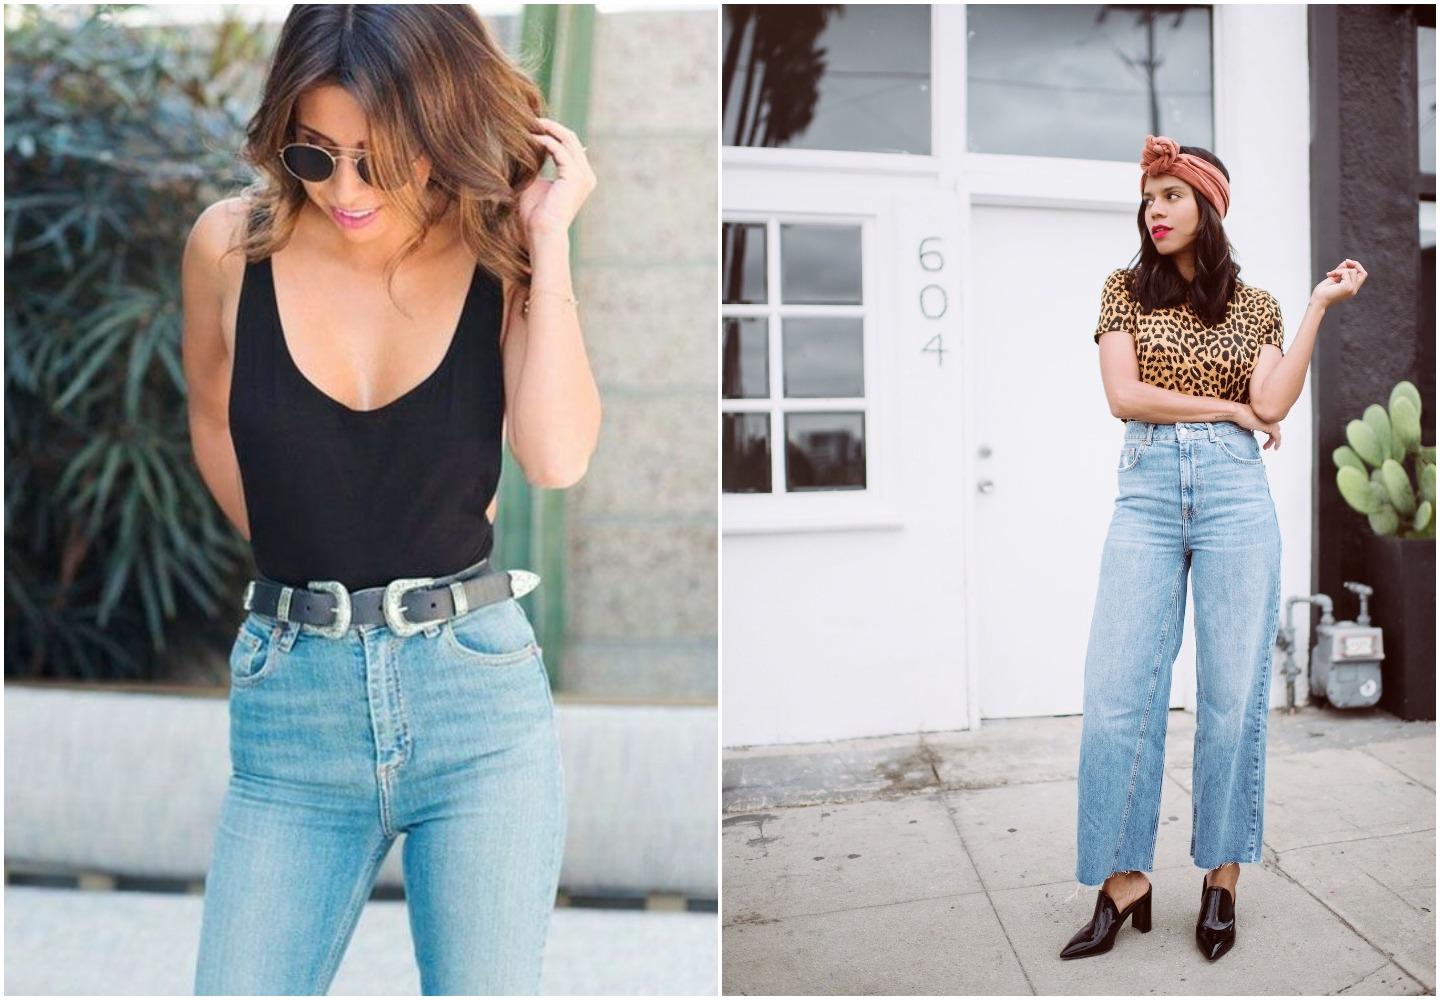 #StyleGuide: 20 Fabulous Tops That Look Super Chic With High Rise Jeans